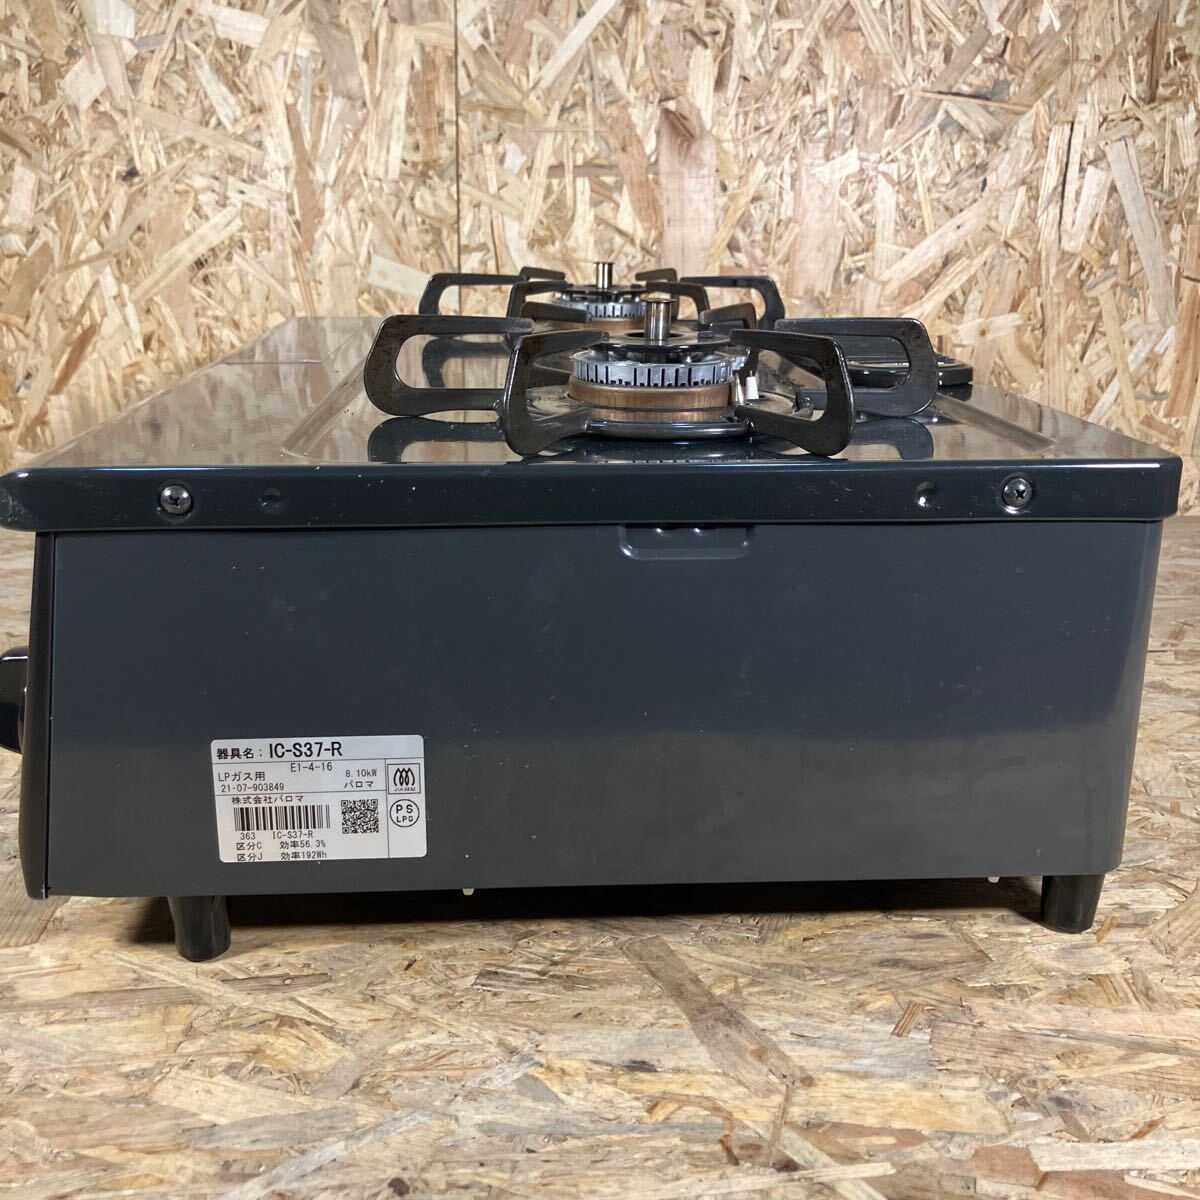 1 jpy ~/Paloma/paroma/ gas-stove /LP gas /IC-S37-R/ gas portable cooking stove / grill attaching /2021 year made / electrification only verification / used / present condition goods 